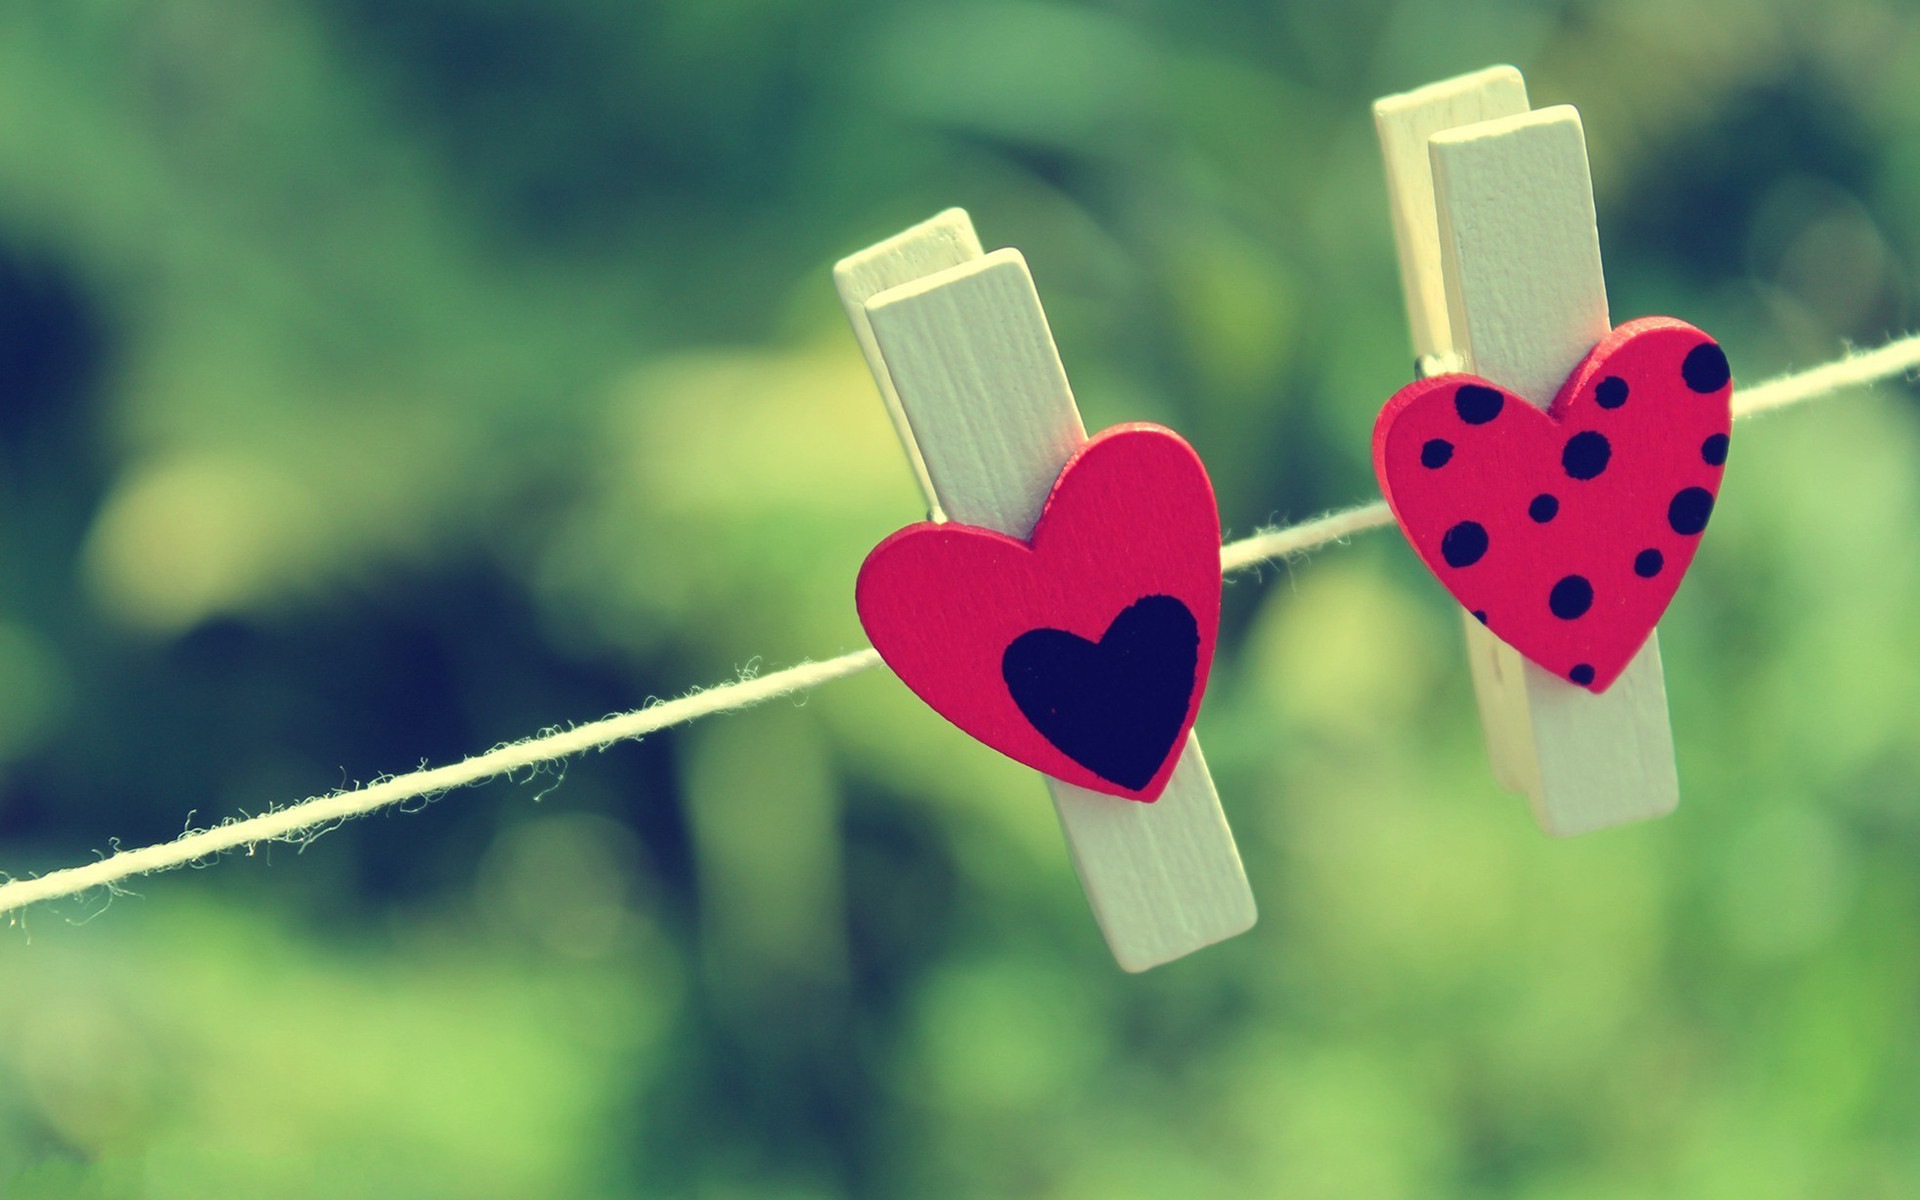 The theme of love, creative heart-shaped HD wallpapers #18 - 1920x1200